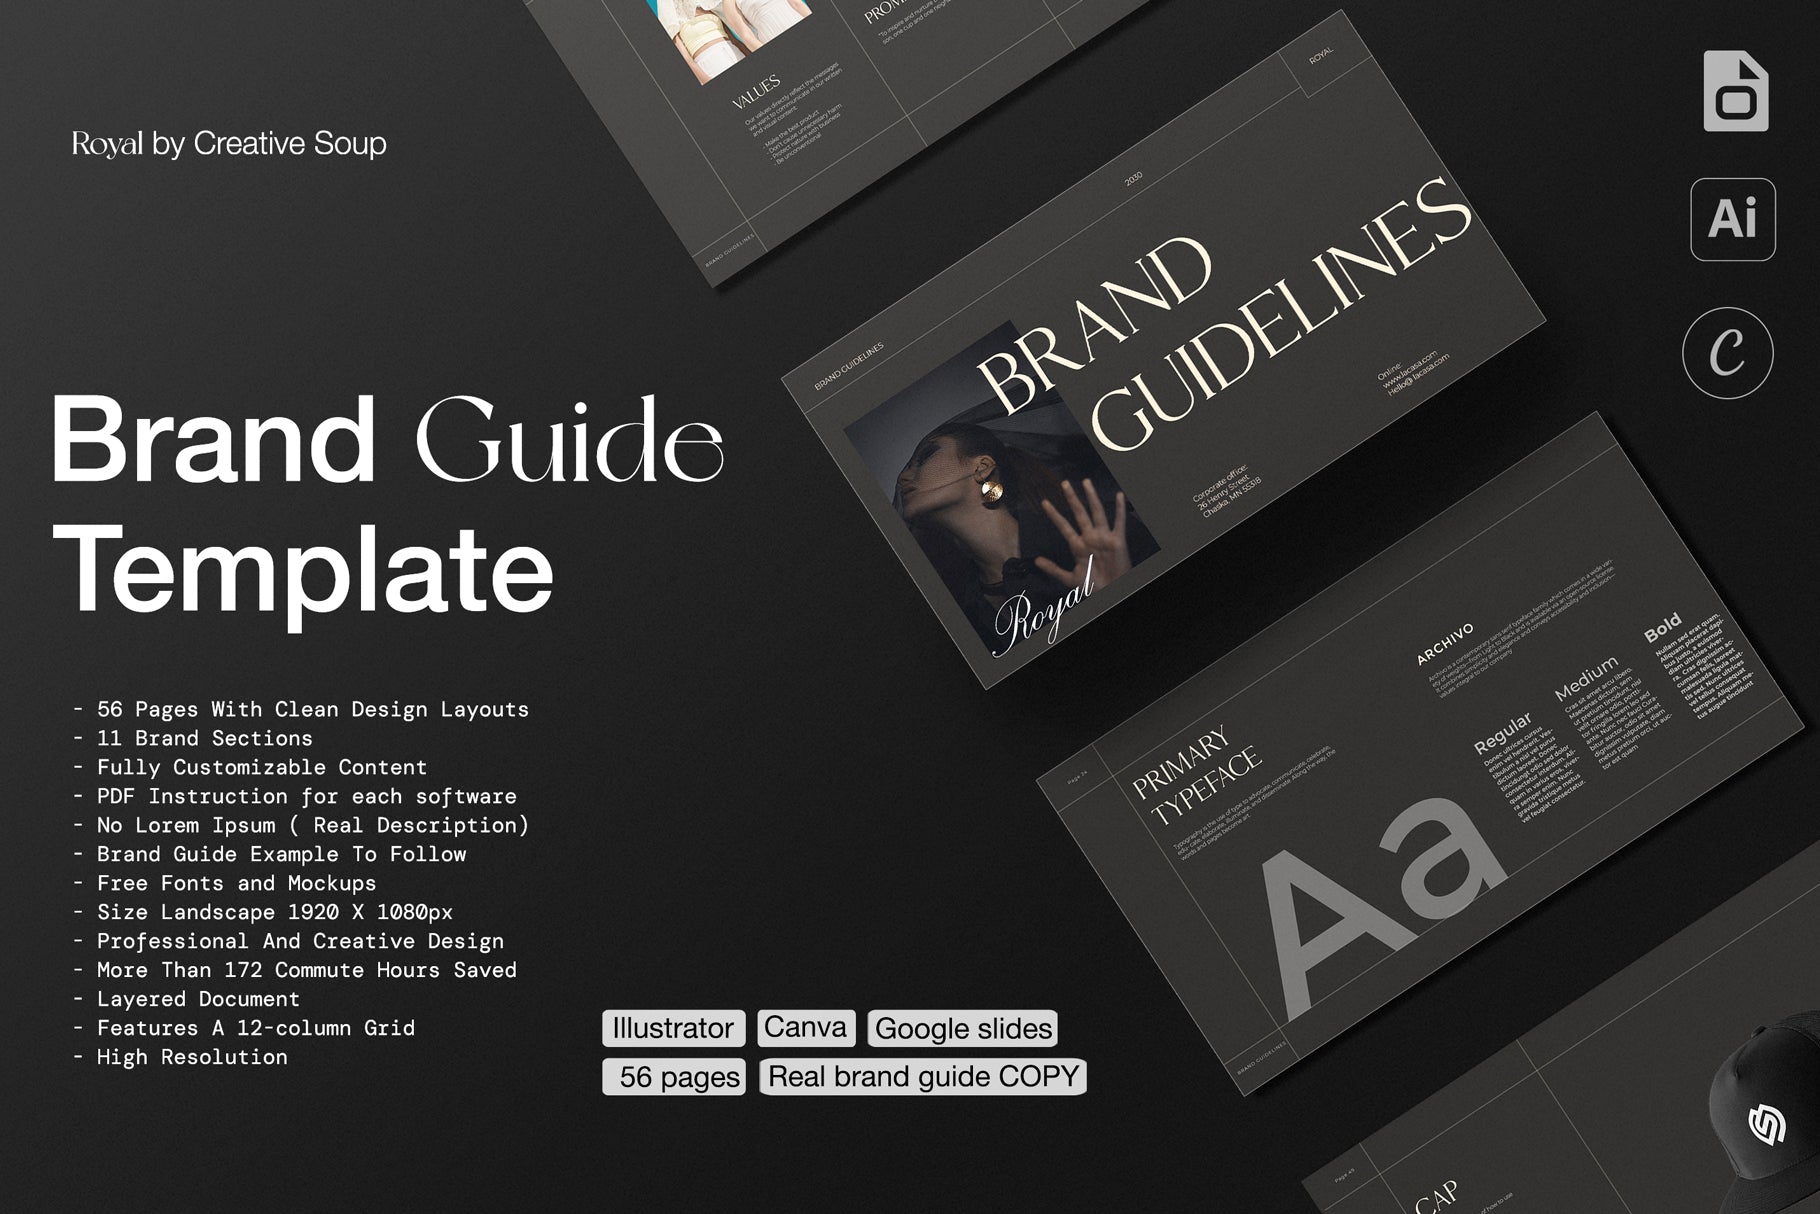 Brand Guidelines Template canva